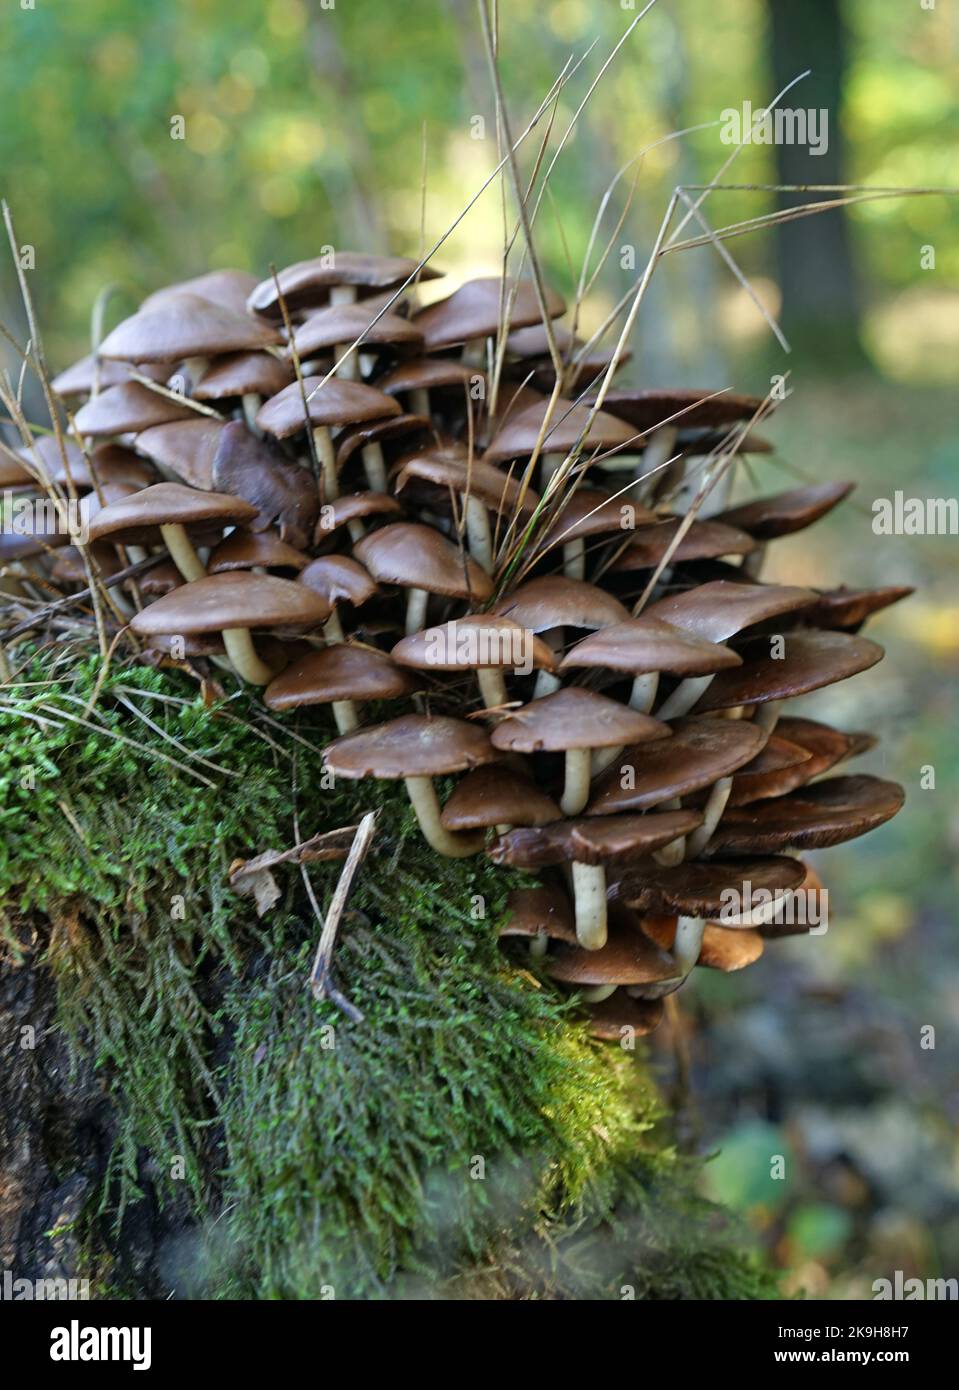 A large cluster of Psathyrella mushrooms growing on a tree trunk in a wood in the Netherlands Stock Photo